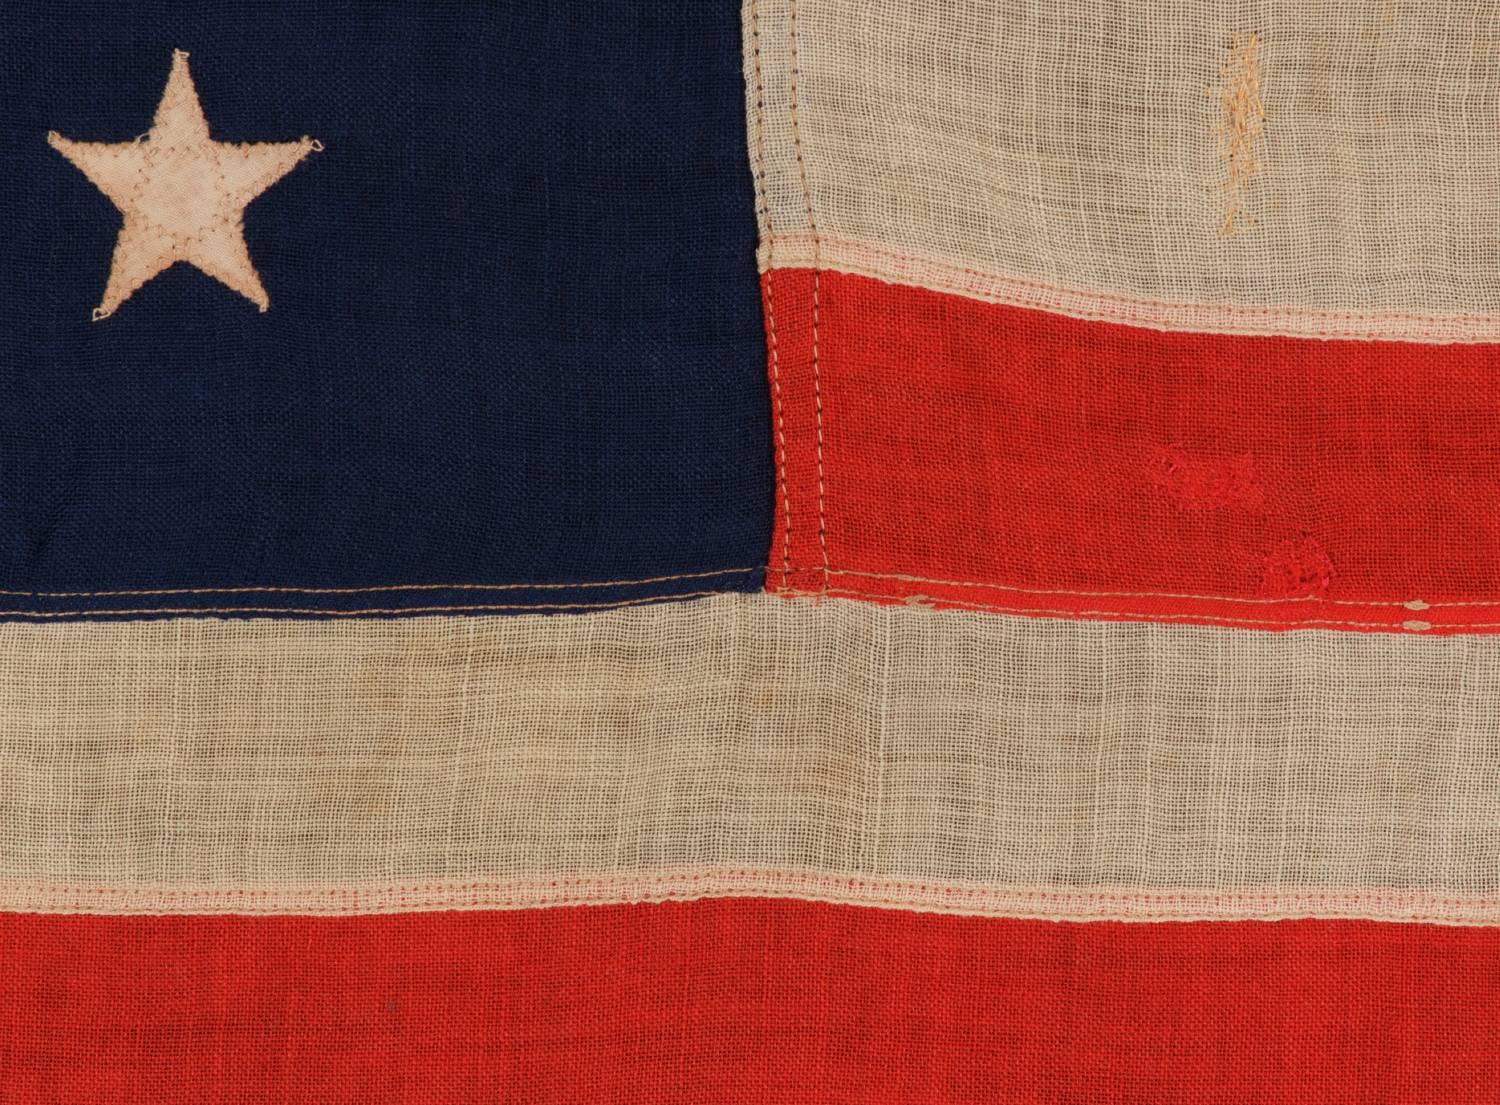 19th Century Antique American Private Yacht Flag with 13 Stars Marked 